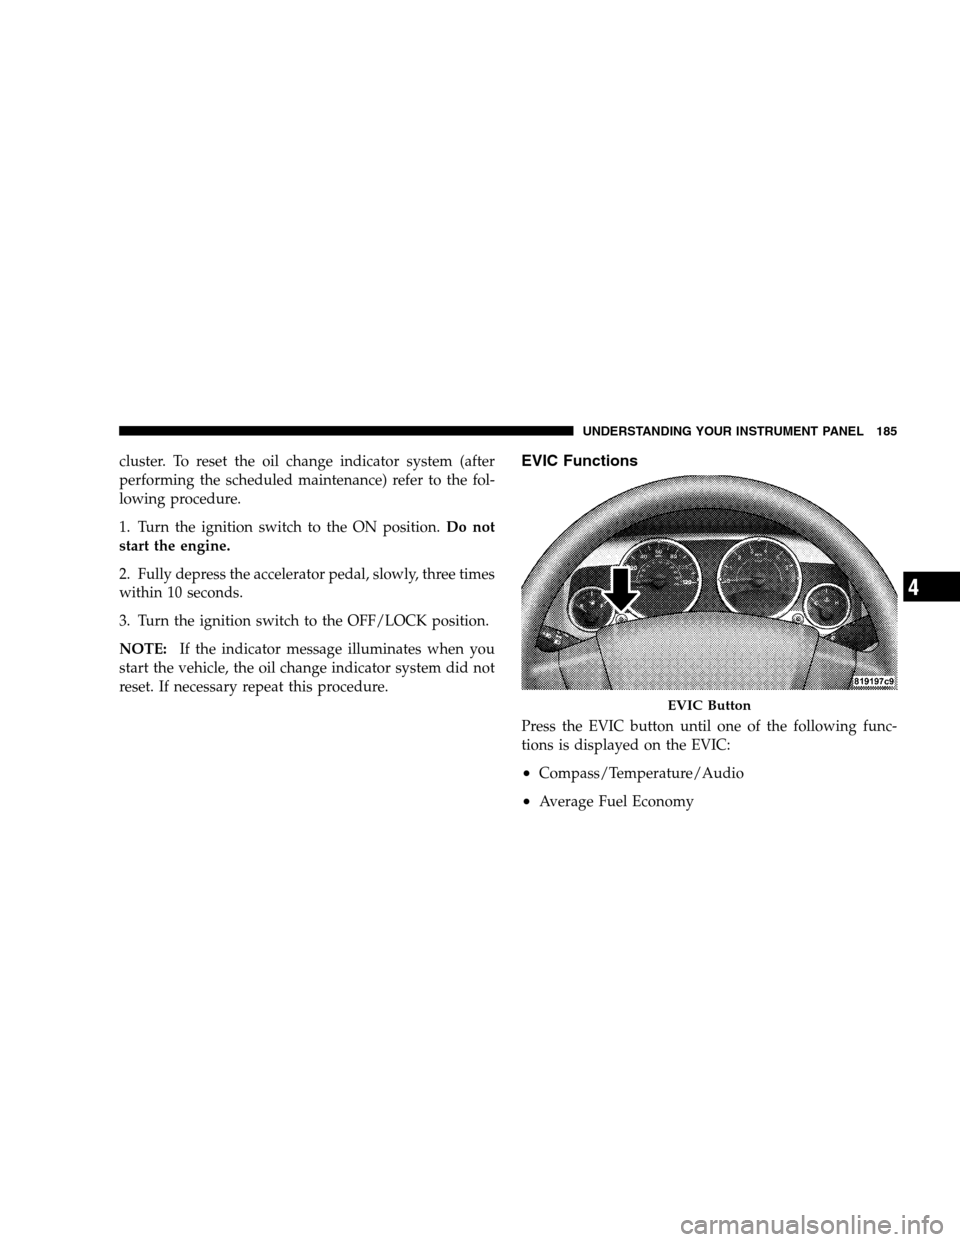 JEEP PATRIOT 2008 1.G Owners Manual cluster. To reset the oil change indicator system (after
performing the scheduled maintenance) refer to the fol-
lowing procedure.
1. Turn the ignition switch to the ON position.Do not
start the engin